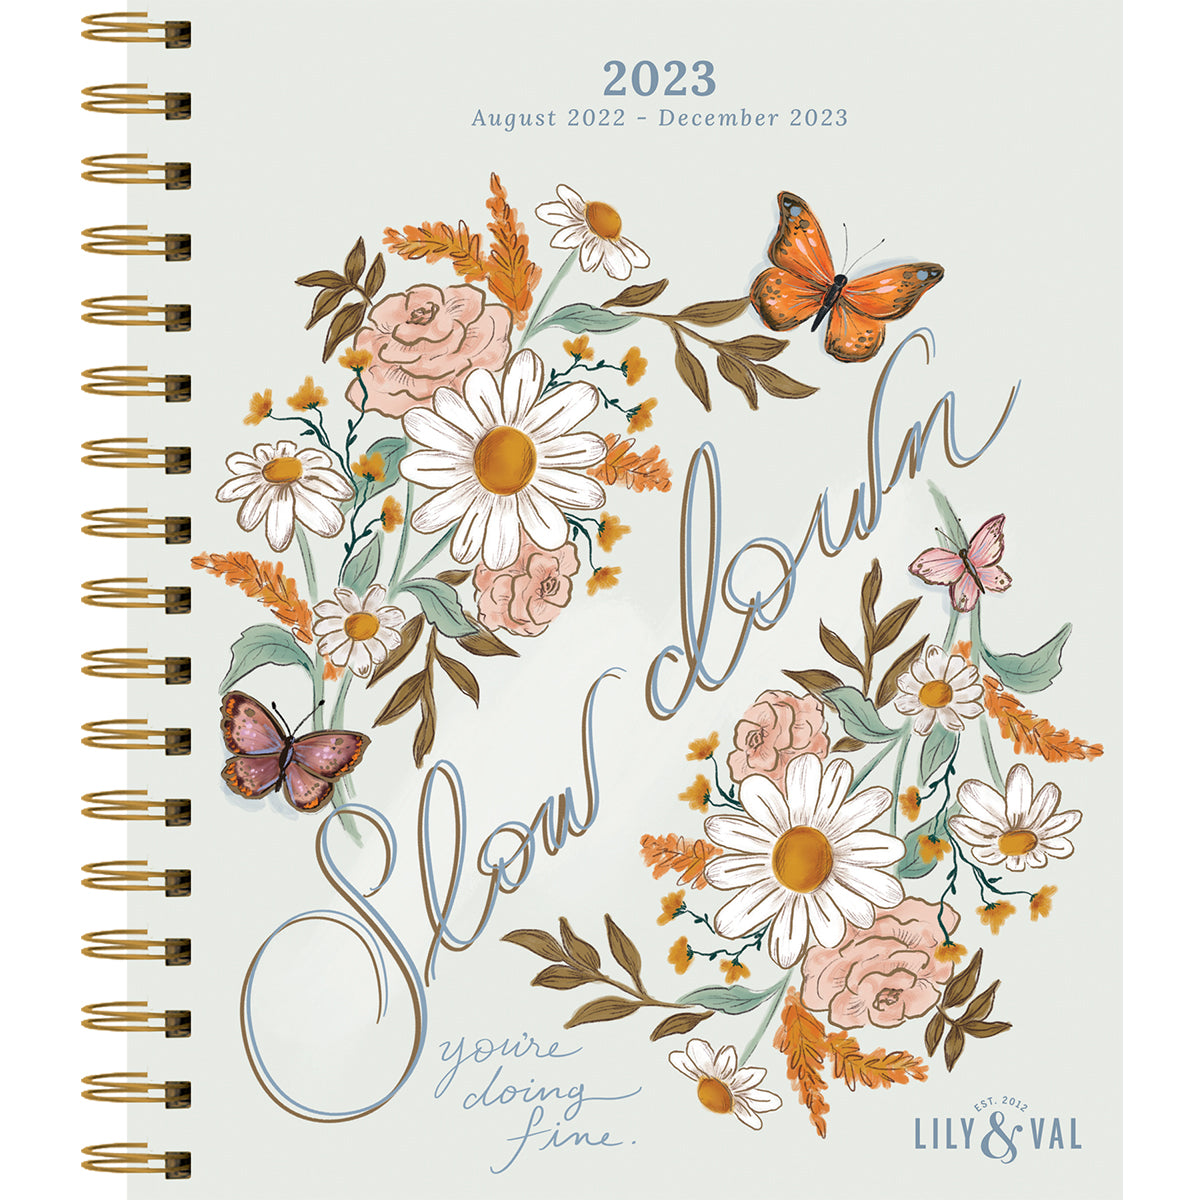 Slow Down You're Doing Fine 2023 Agenda Planner